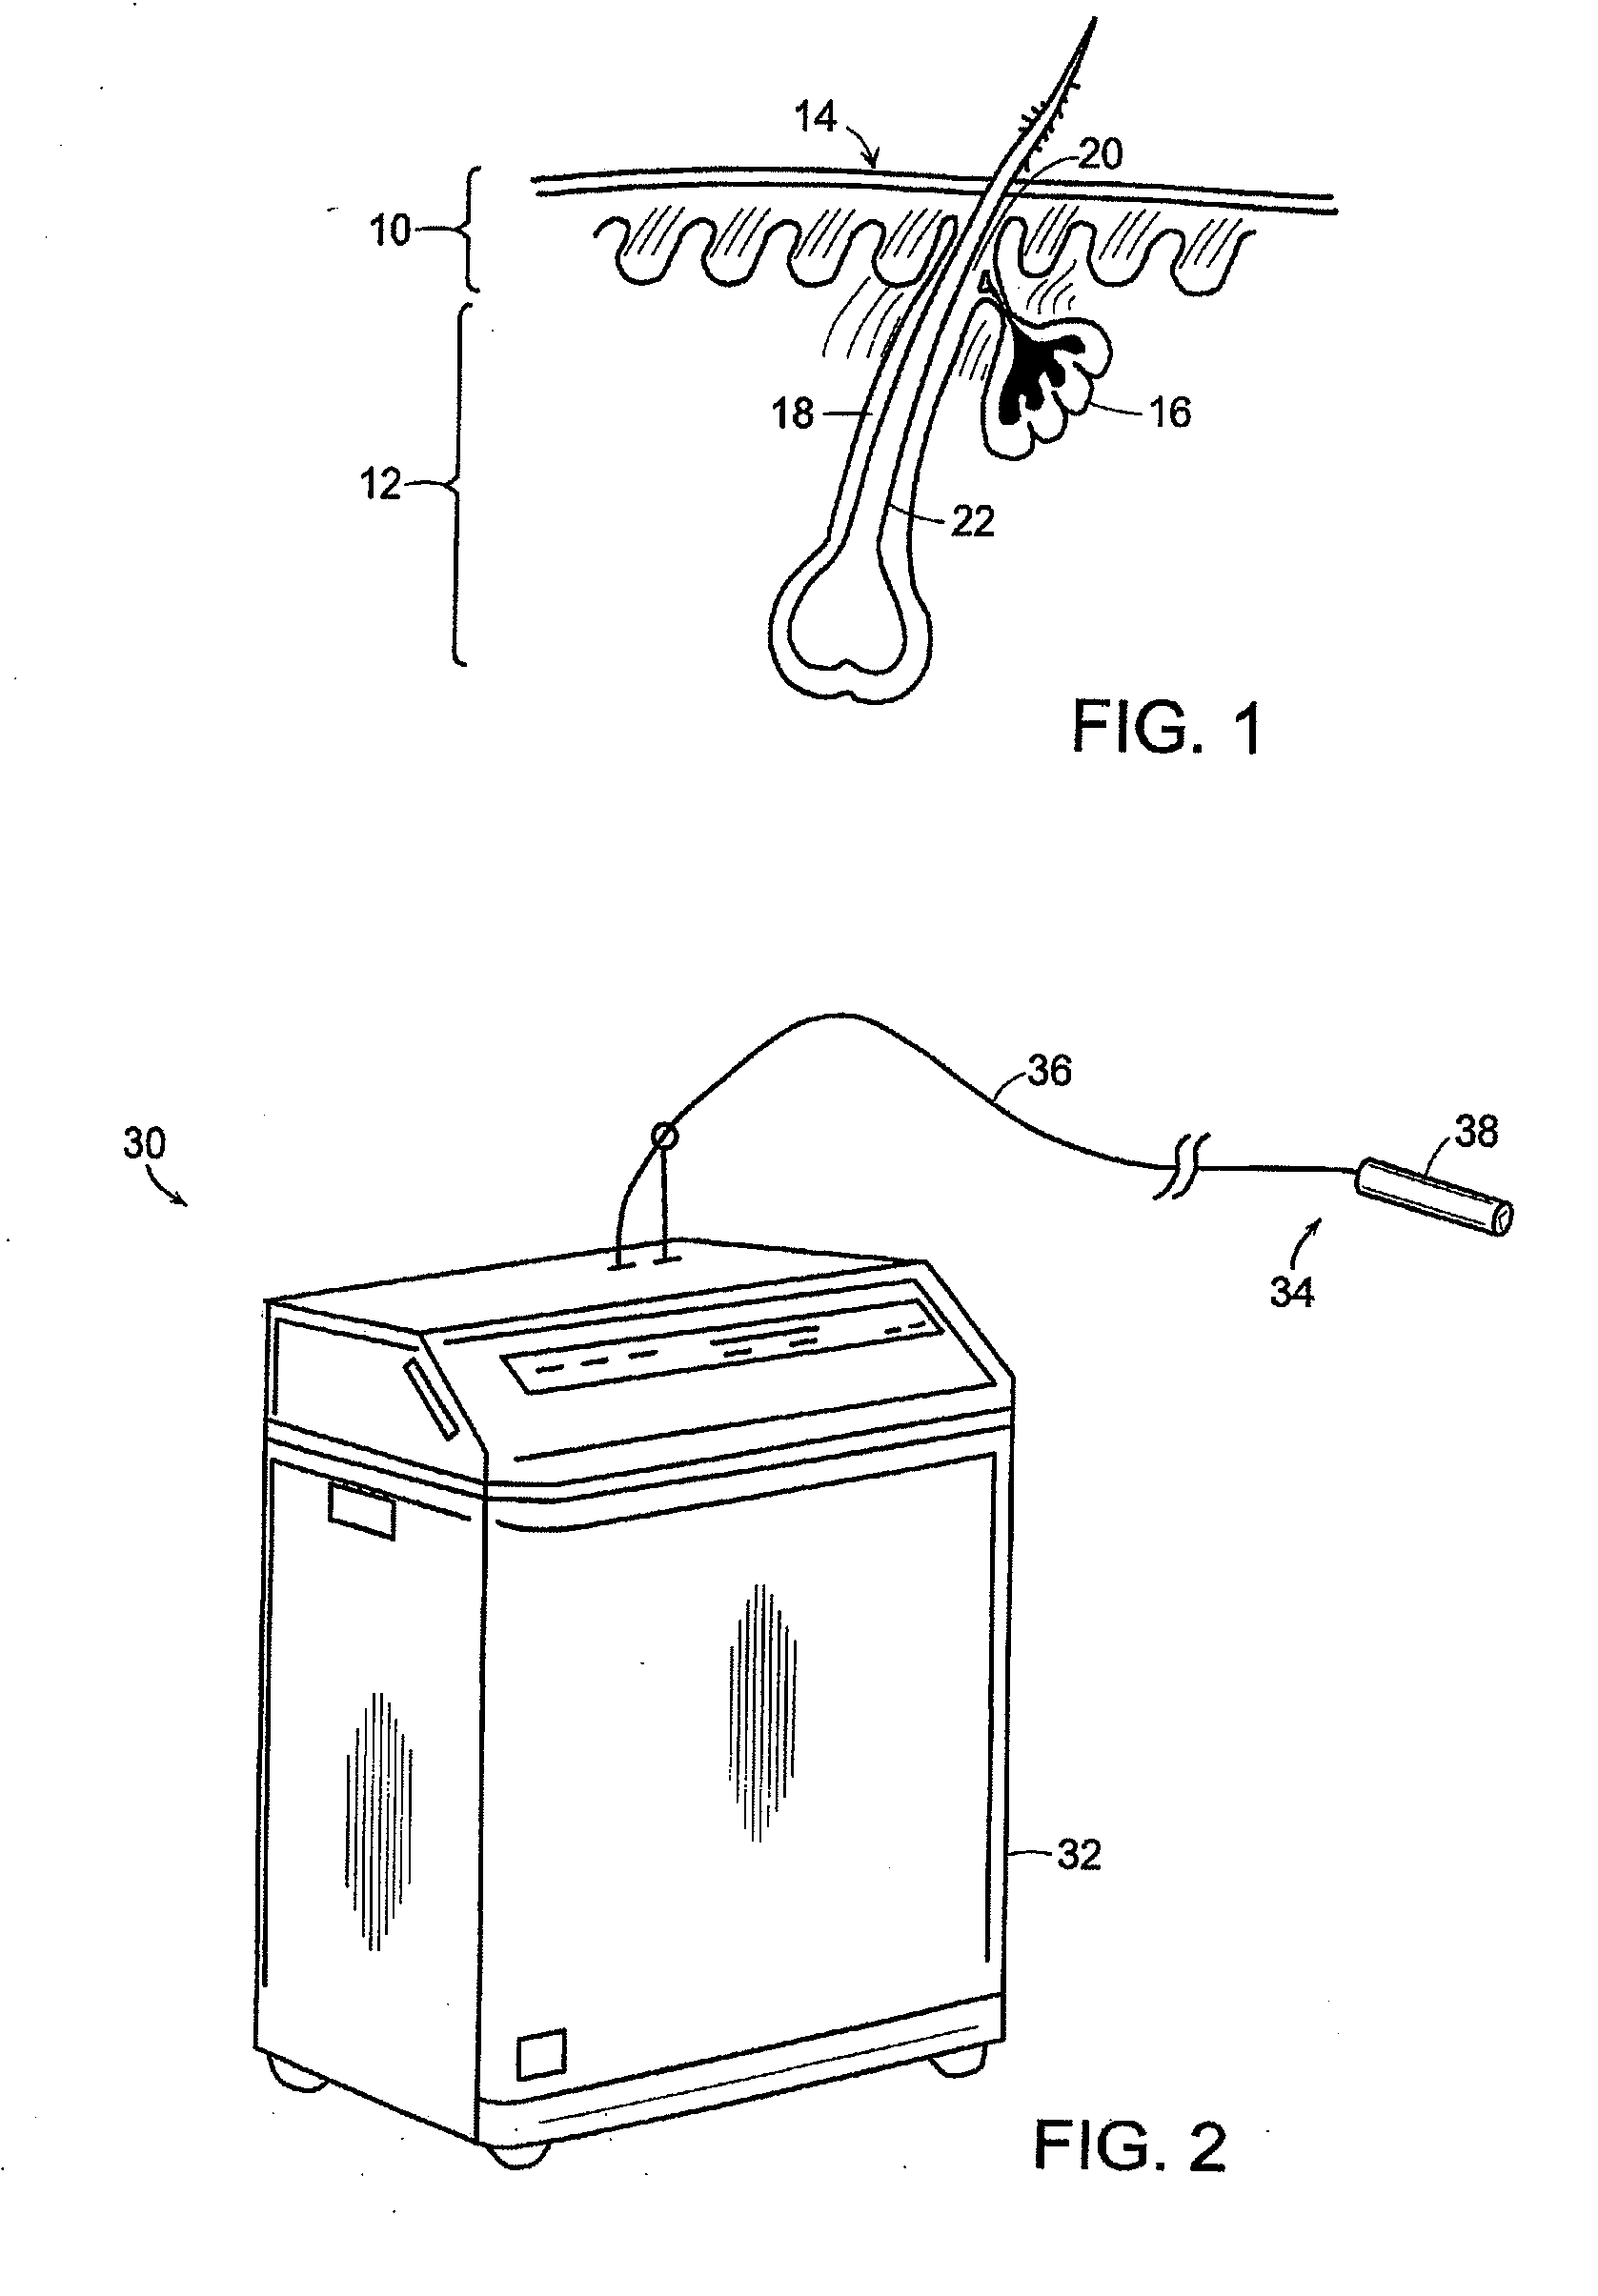 Method of Treating Disorders Associated with Sebaceous Follicles